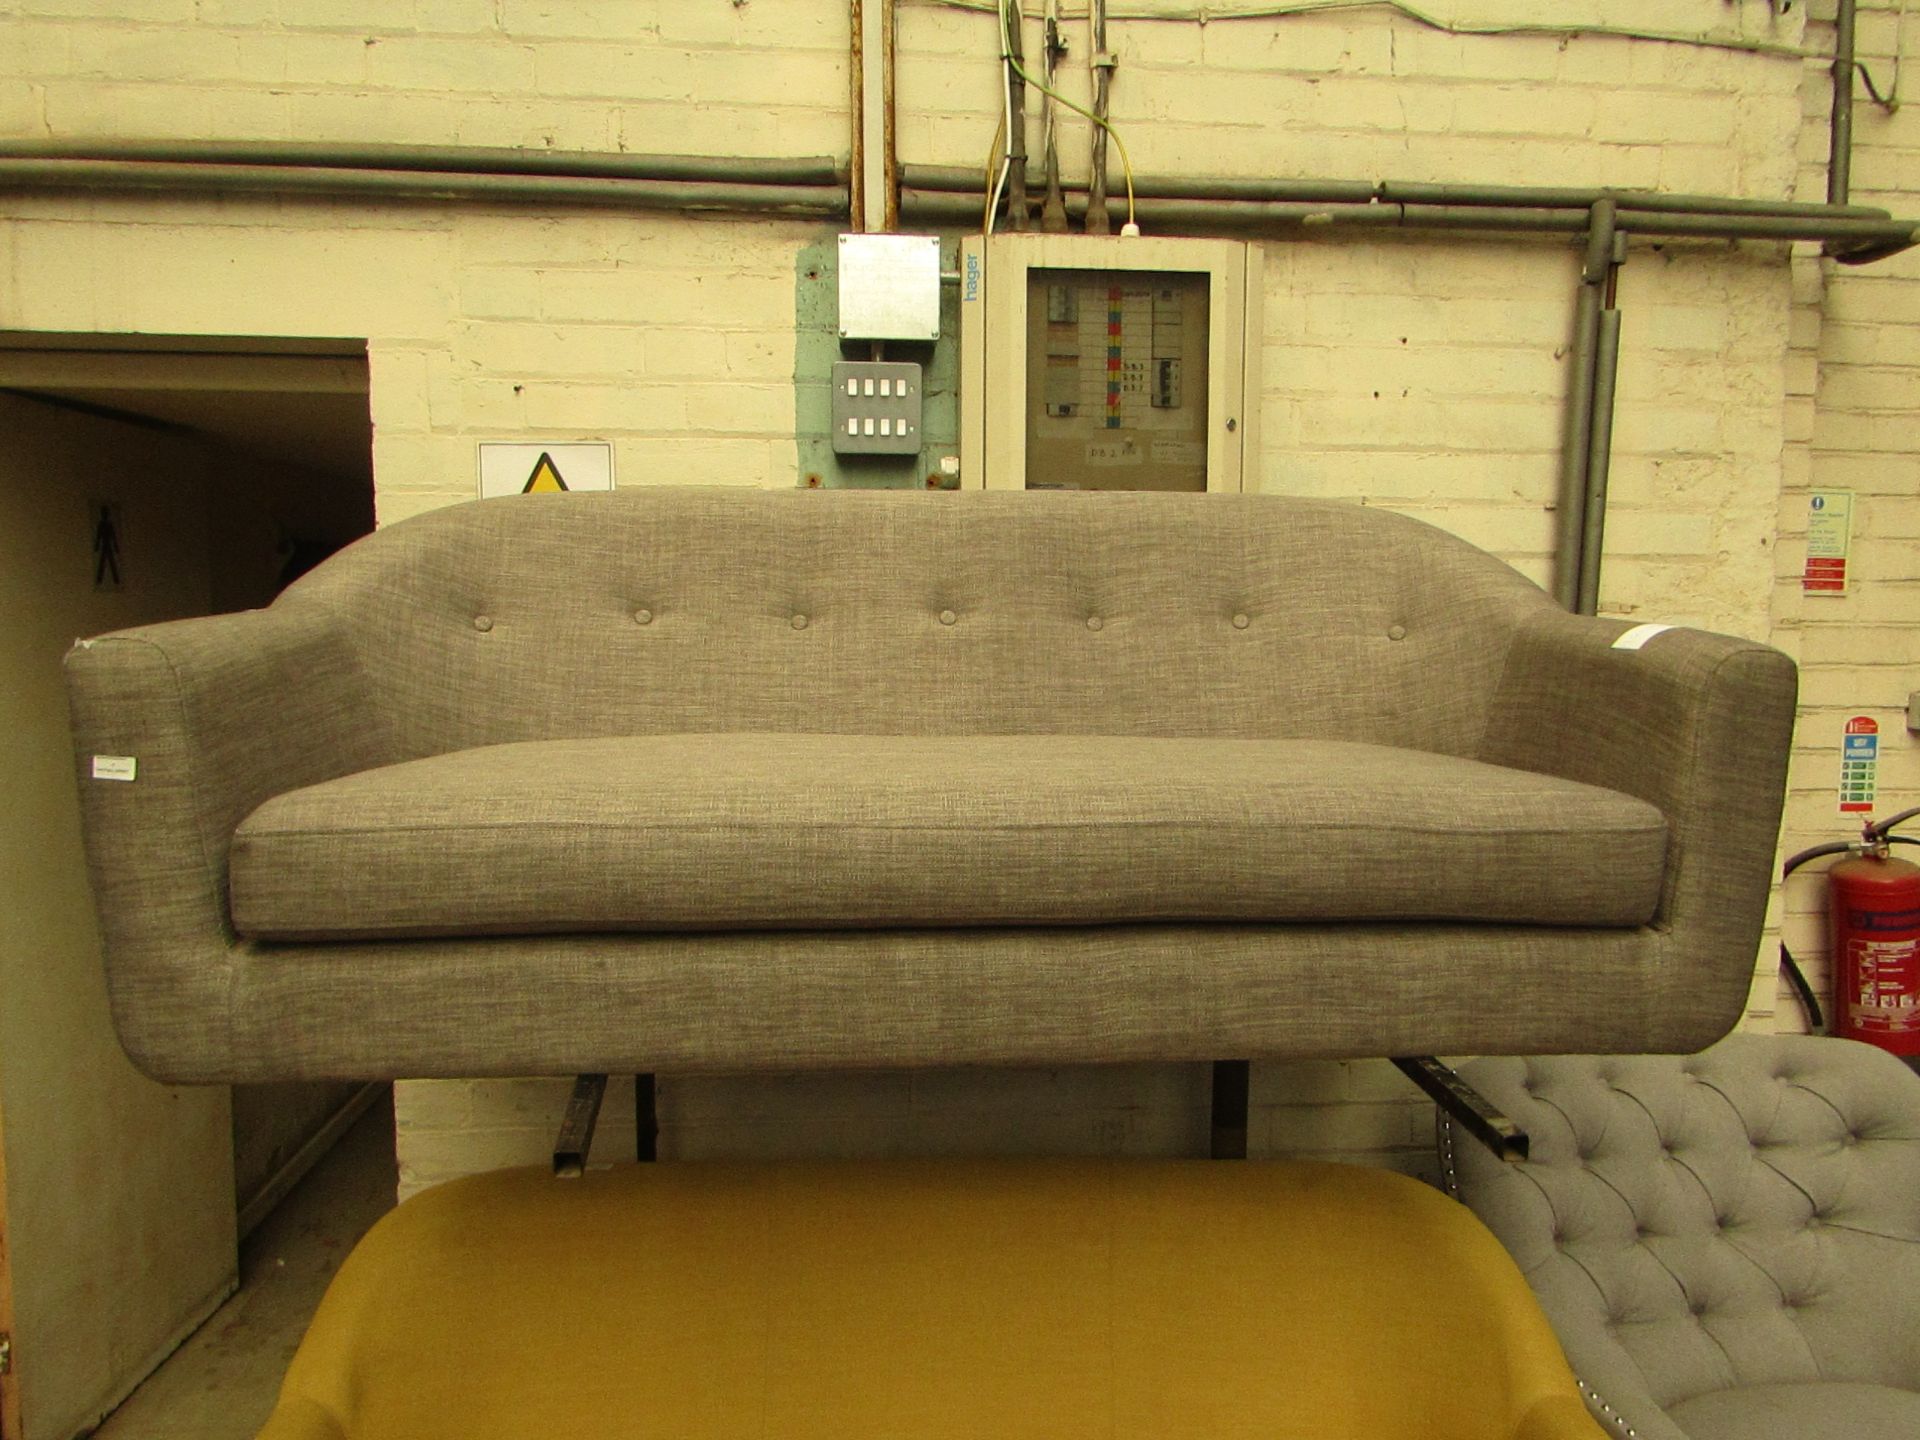 | 1X | MADE.COM TUBBY SOFA | NO MAJOR DAMAGE (PLEASE NOTE, THIS DOES NOT PROVIDE ANY WARRANTY OR